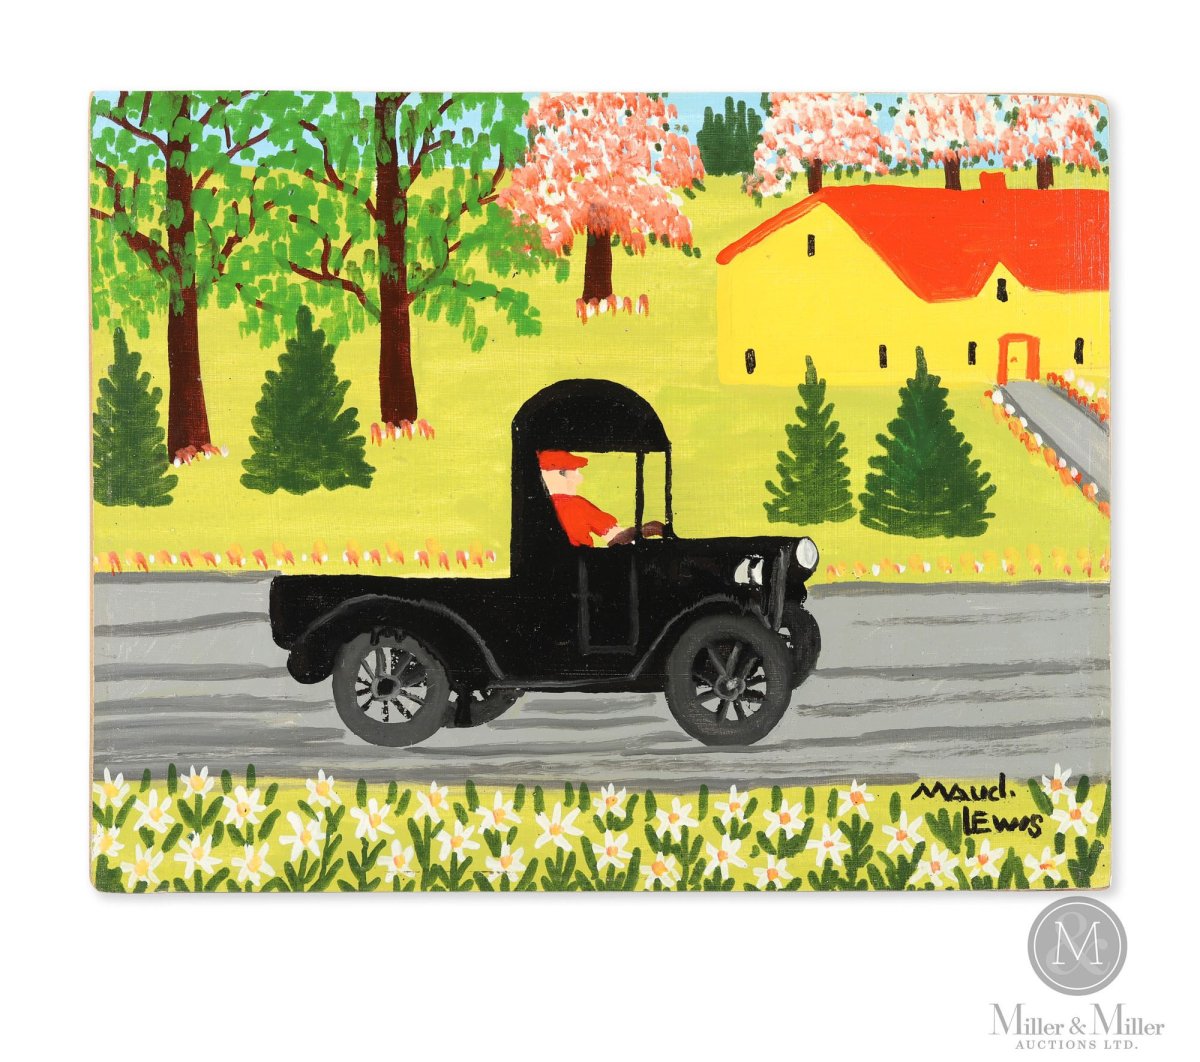 Maud Lewis painting sells at Ontario auction for record price of $350,000 - image